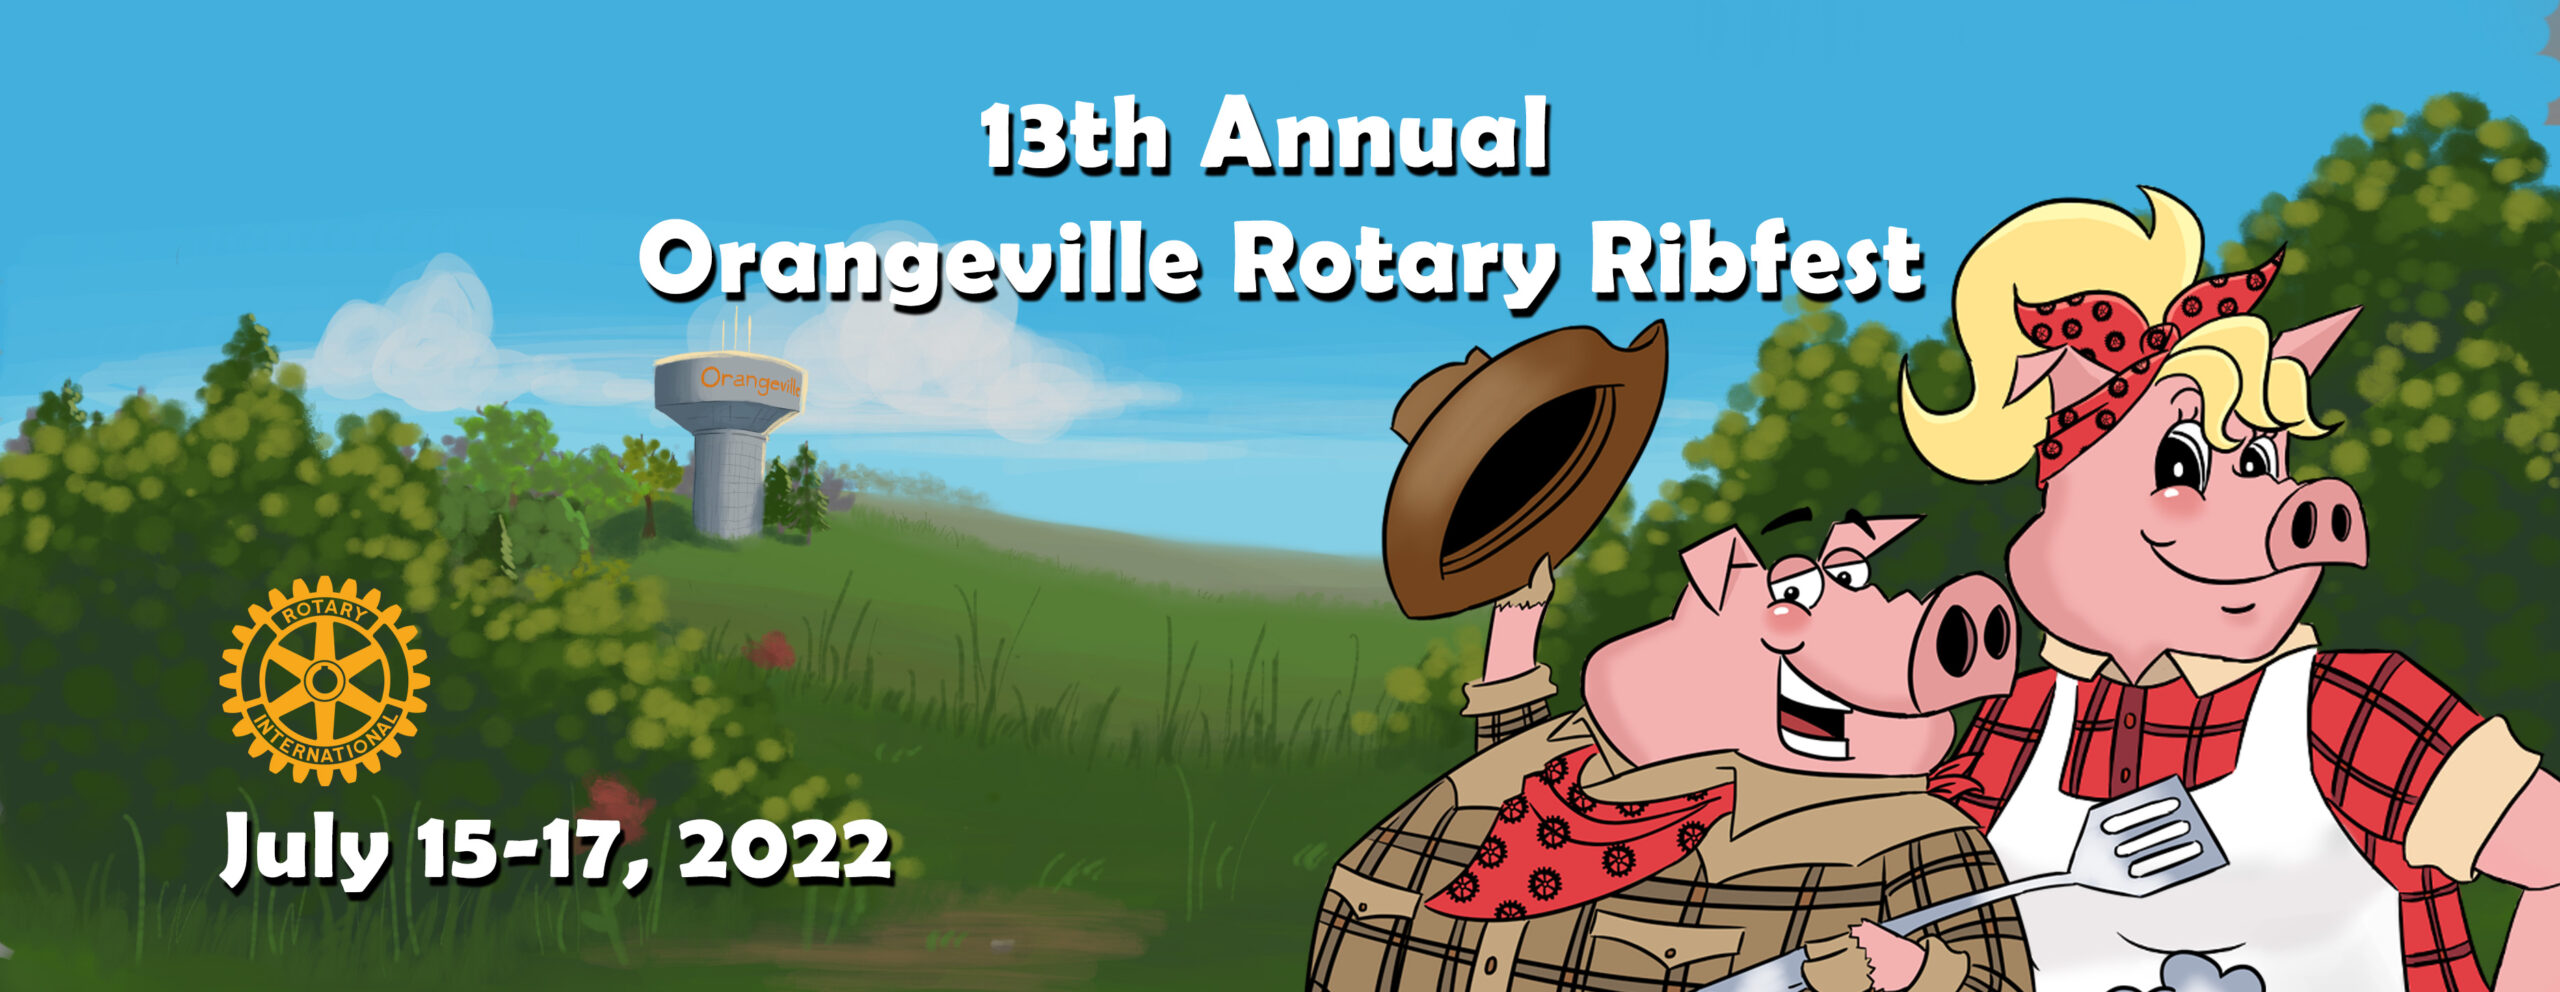 Cartoon image of a field with the Orangeville water tower in background, and the mascots announcing 13th Annual Orangeville Rotary Ribfest on July 15 to 17, 2022.